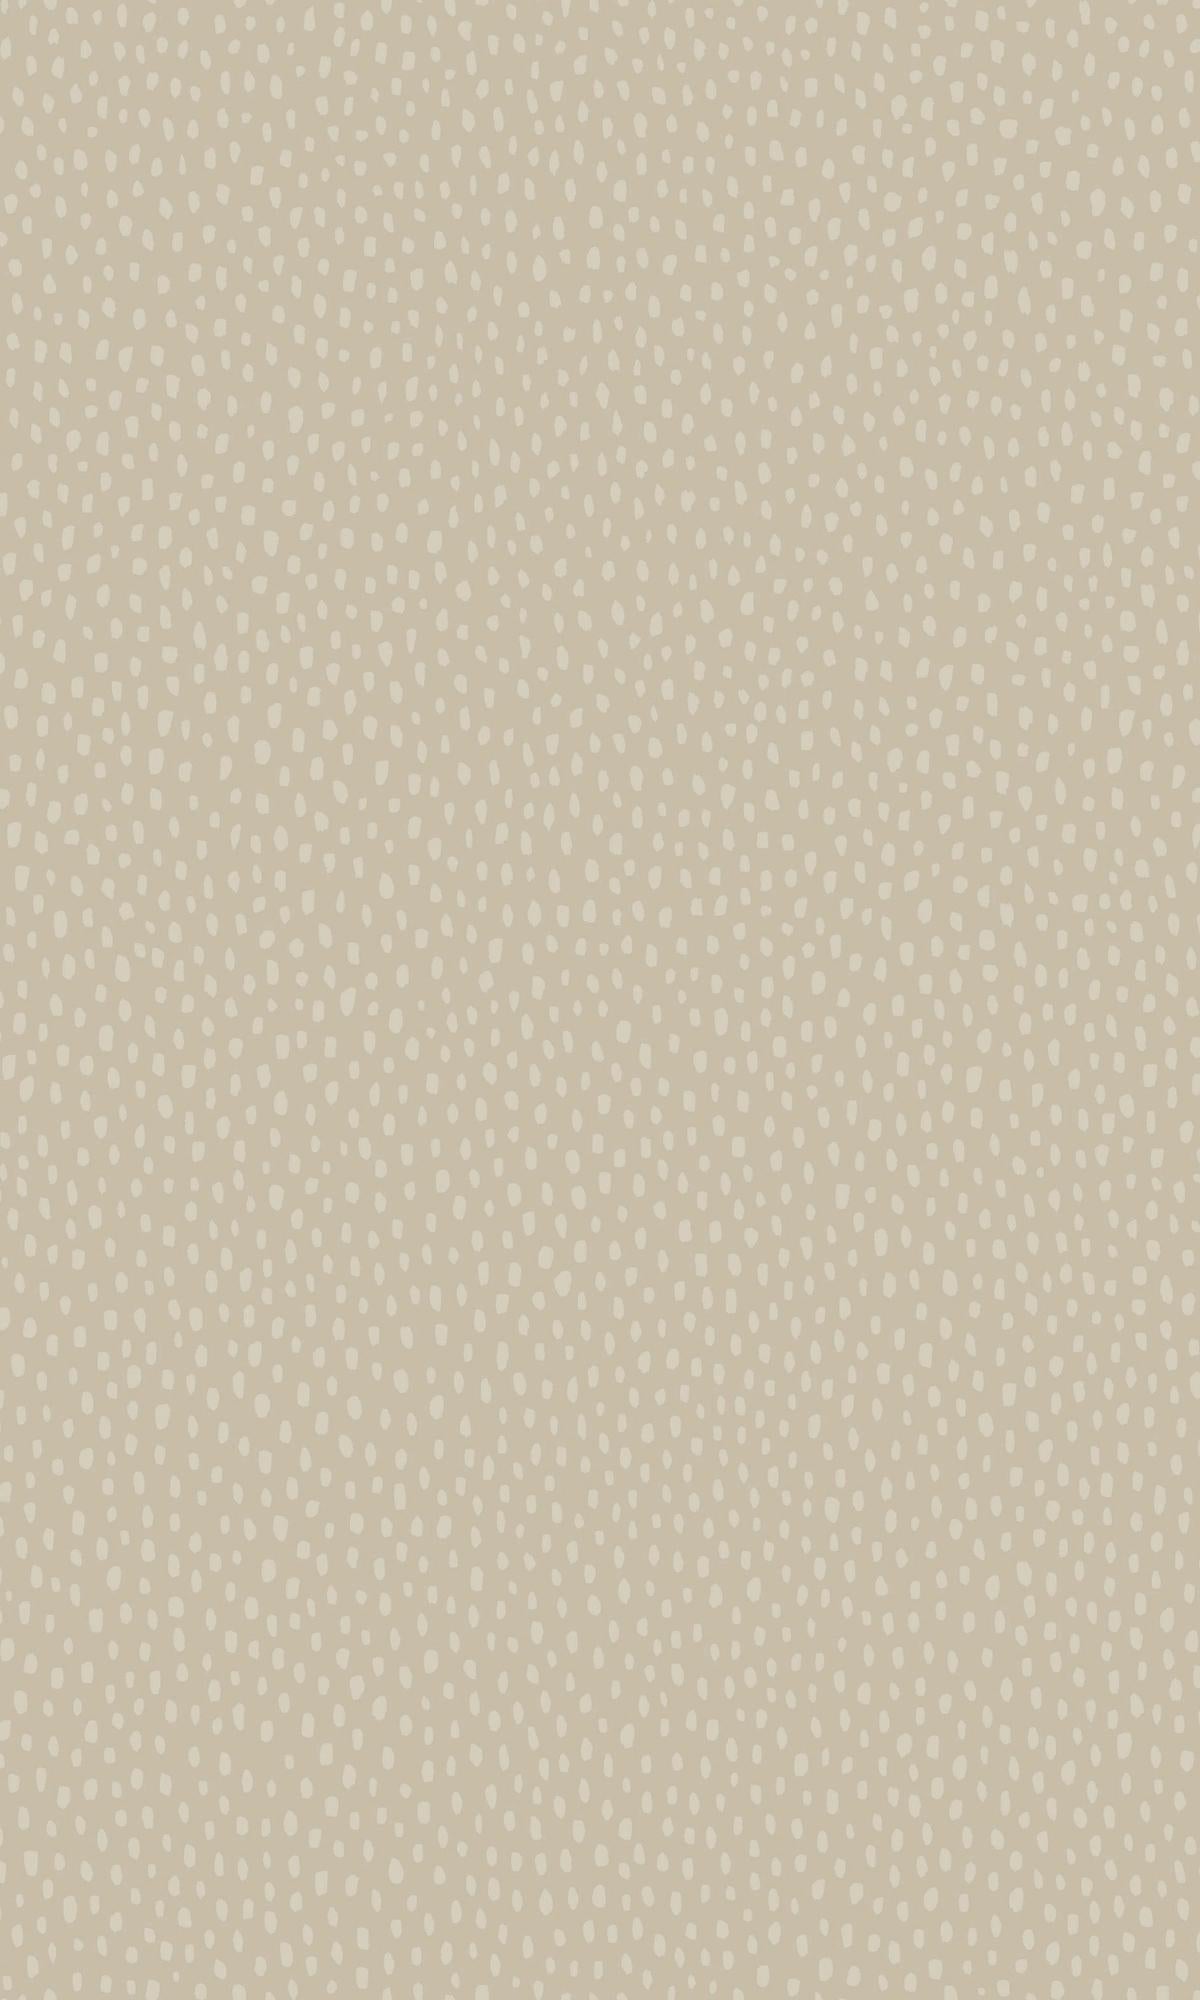 Beige Dotted Plain Simple Textured Wallpaper R7606